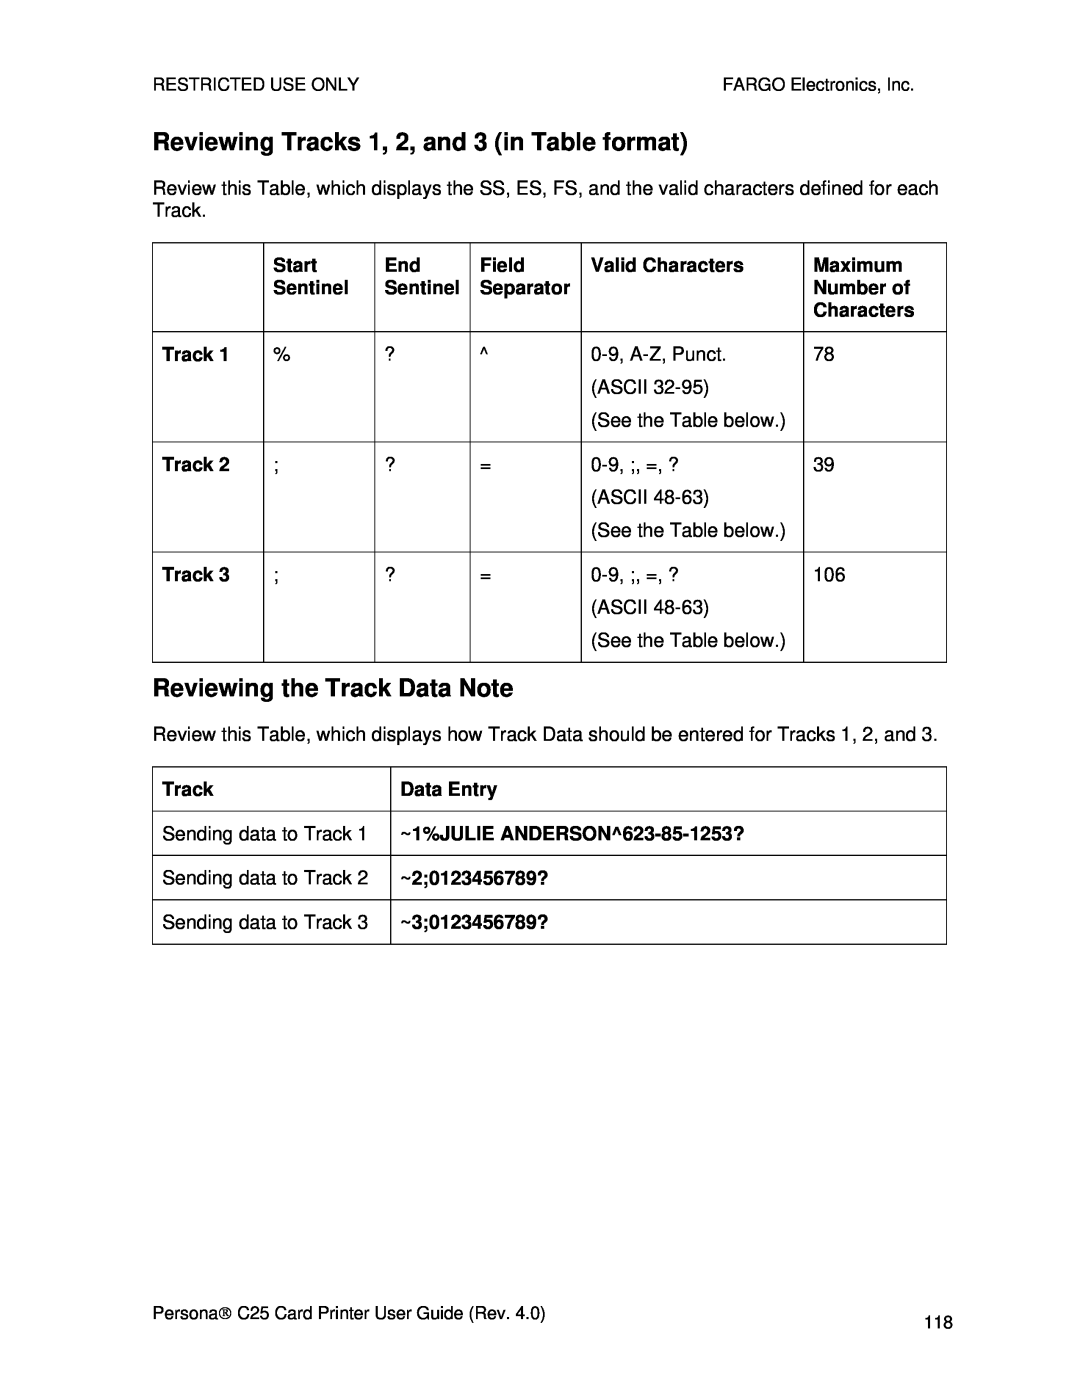 FARGO electronic S000256 manual Reviewing Tracks 1, 2, and 3 in Table format, Reviewing the Track Data Note 